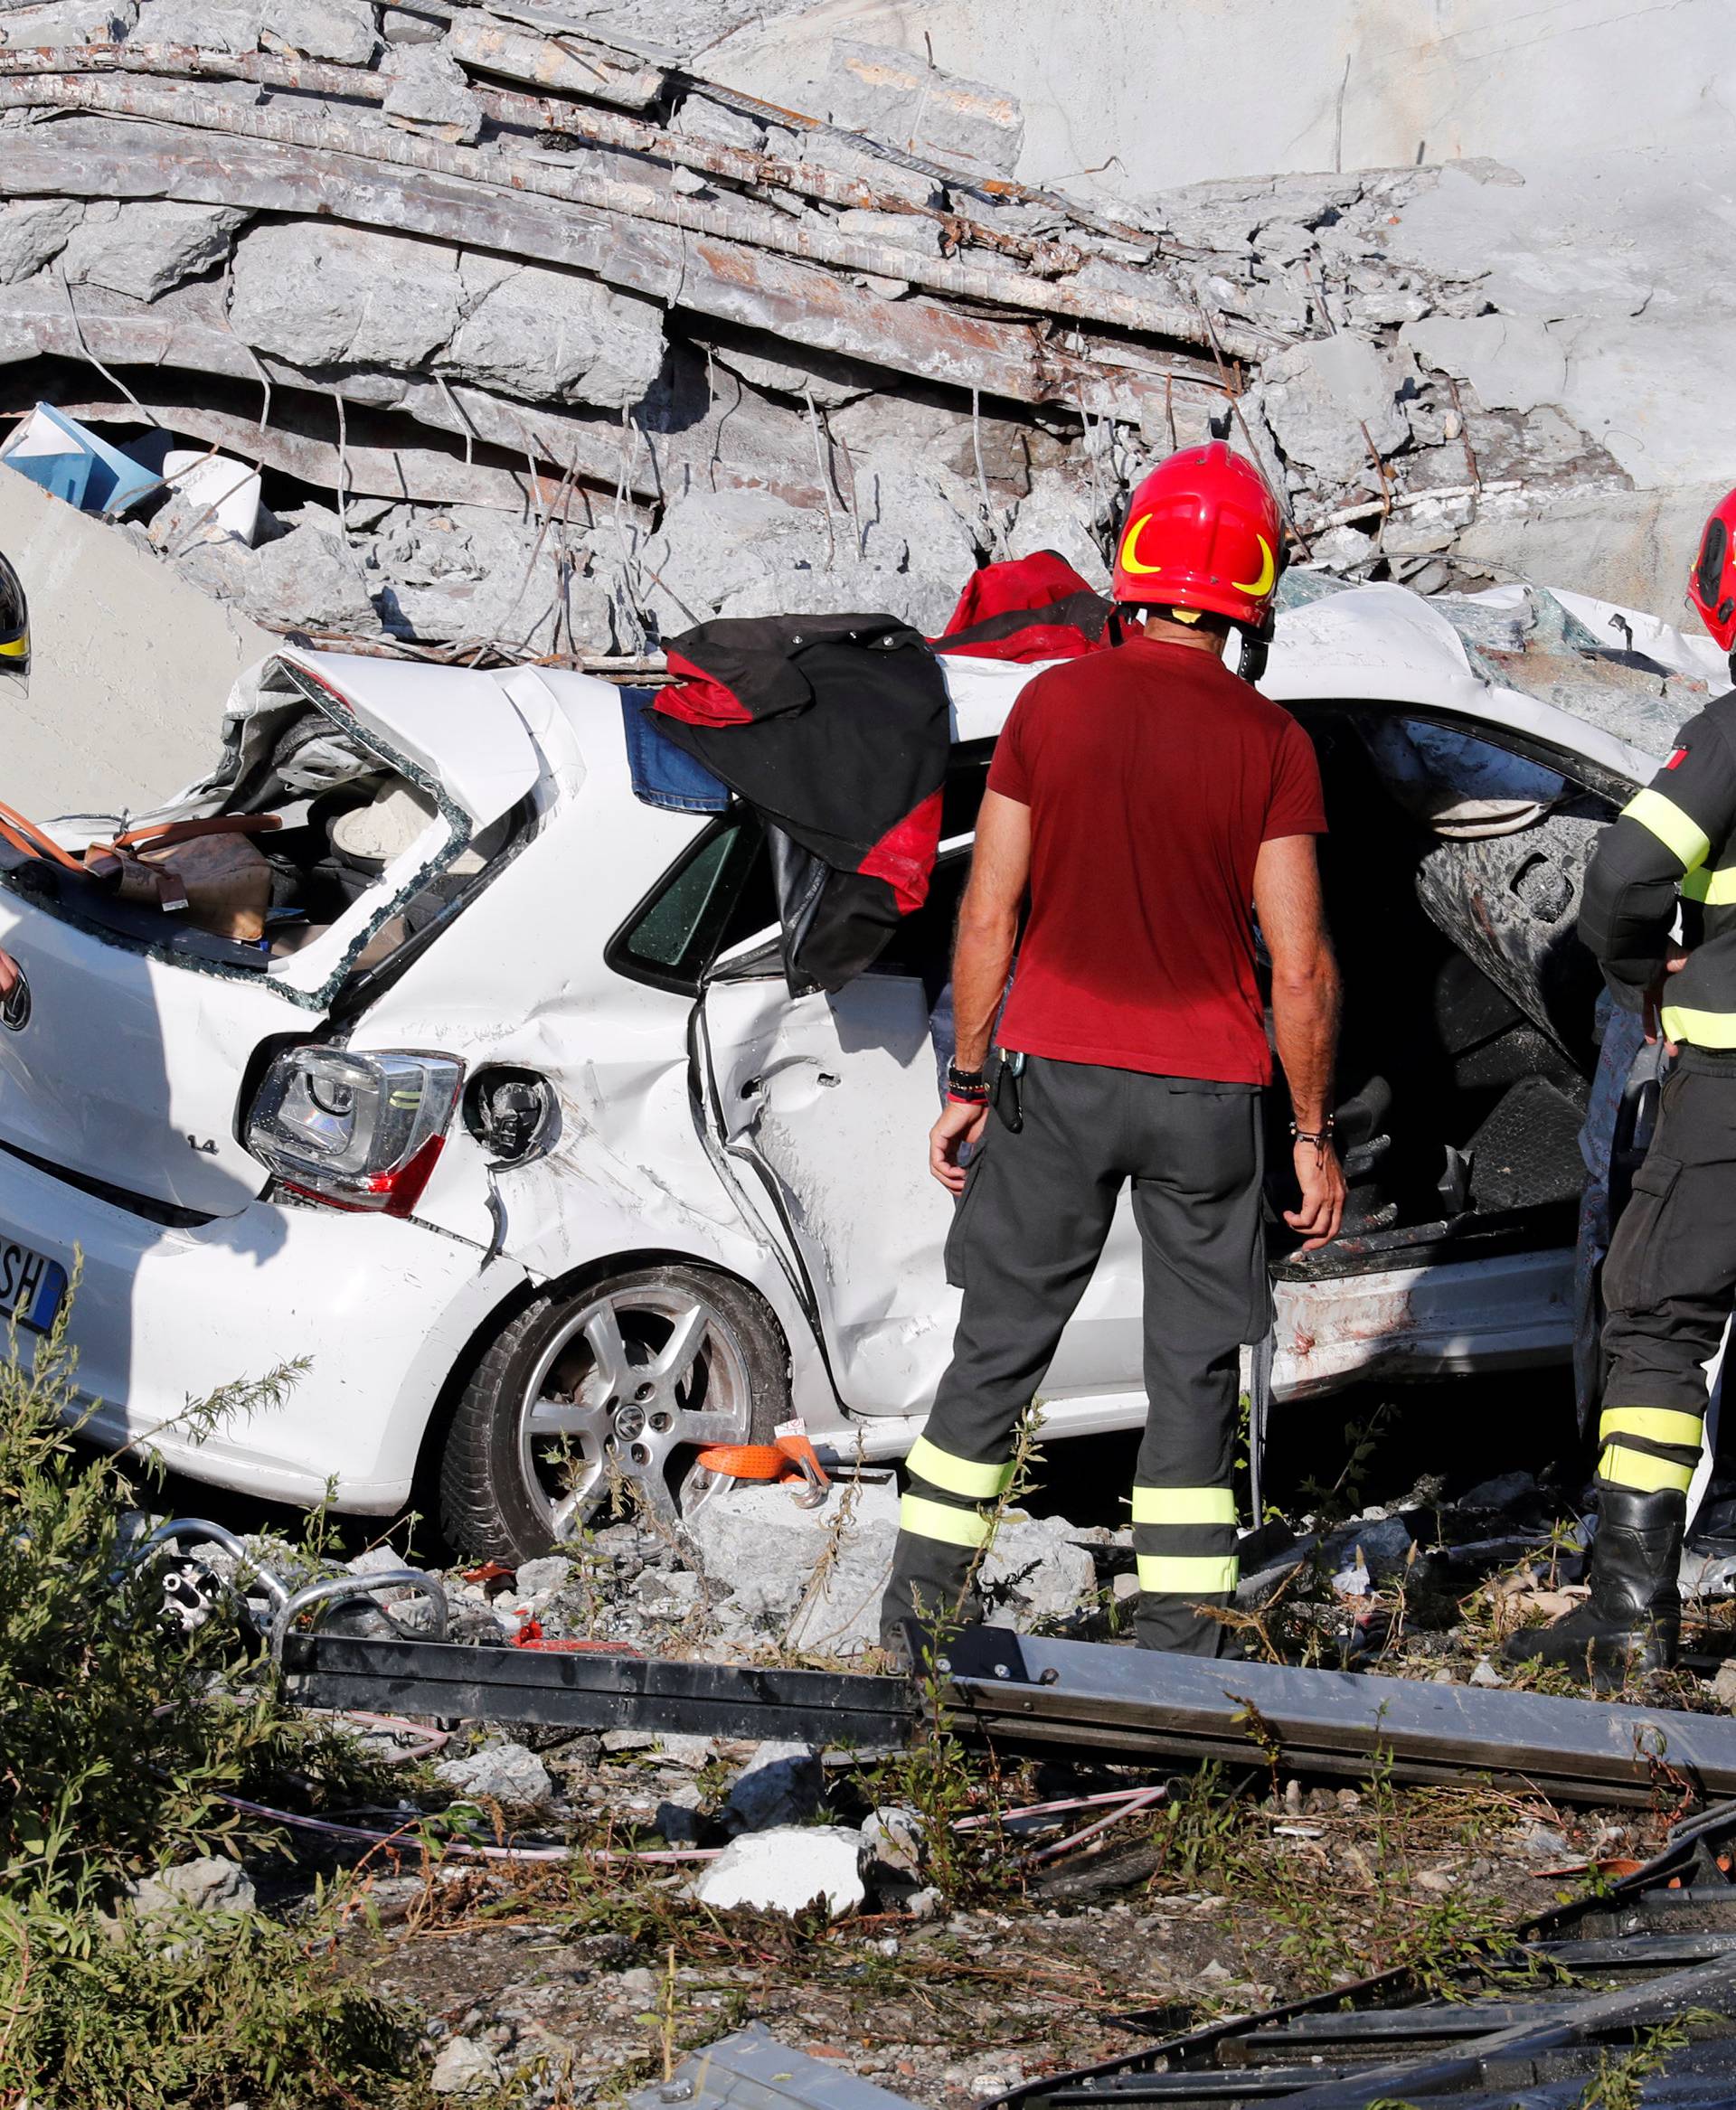 Firefighters stand inspect crushed car at collapsed Morandi Bridge site in Genoa